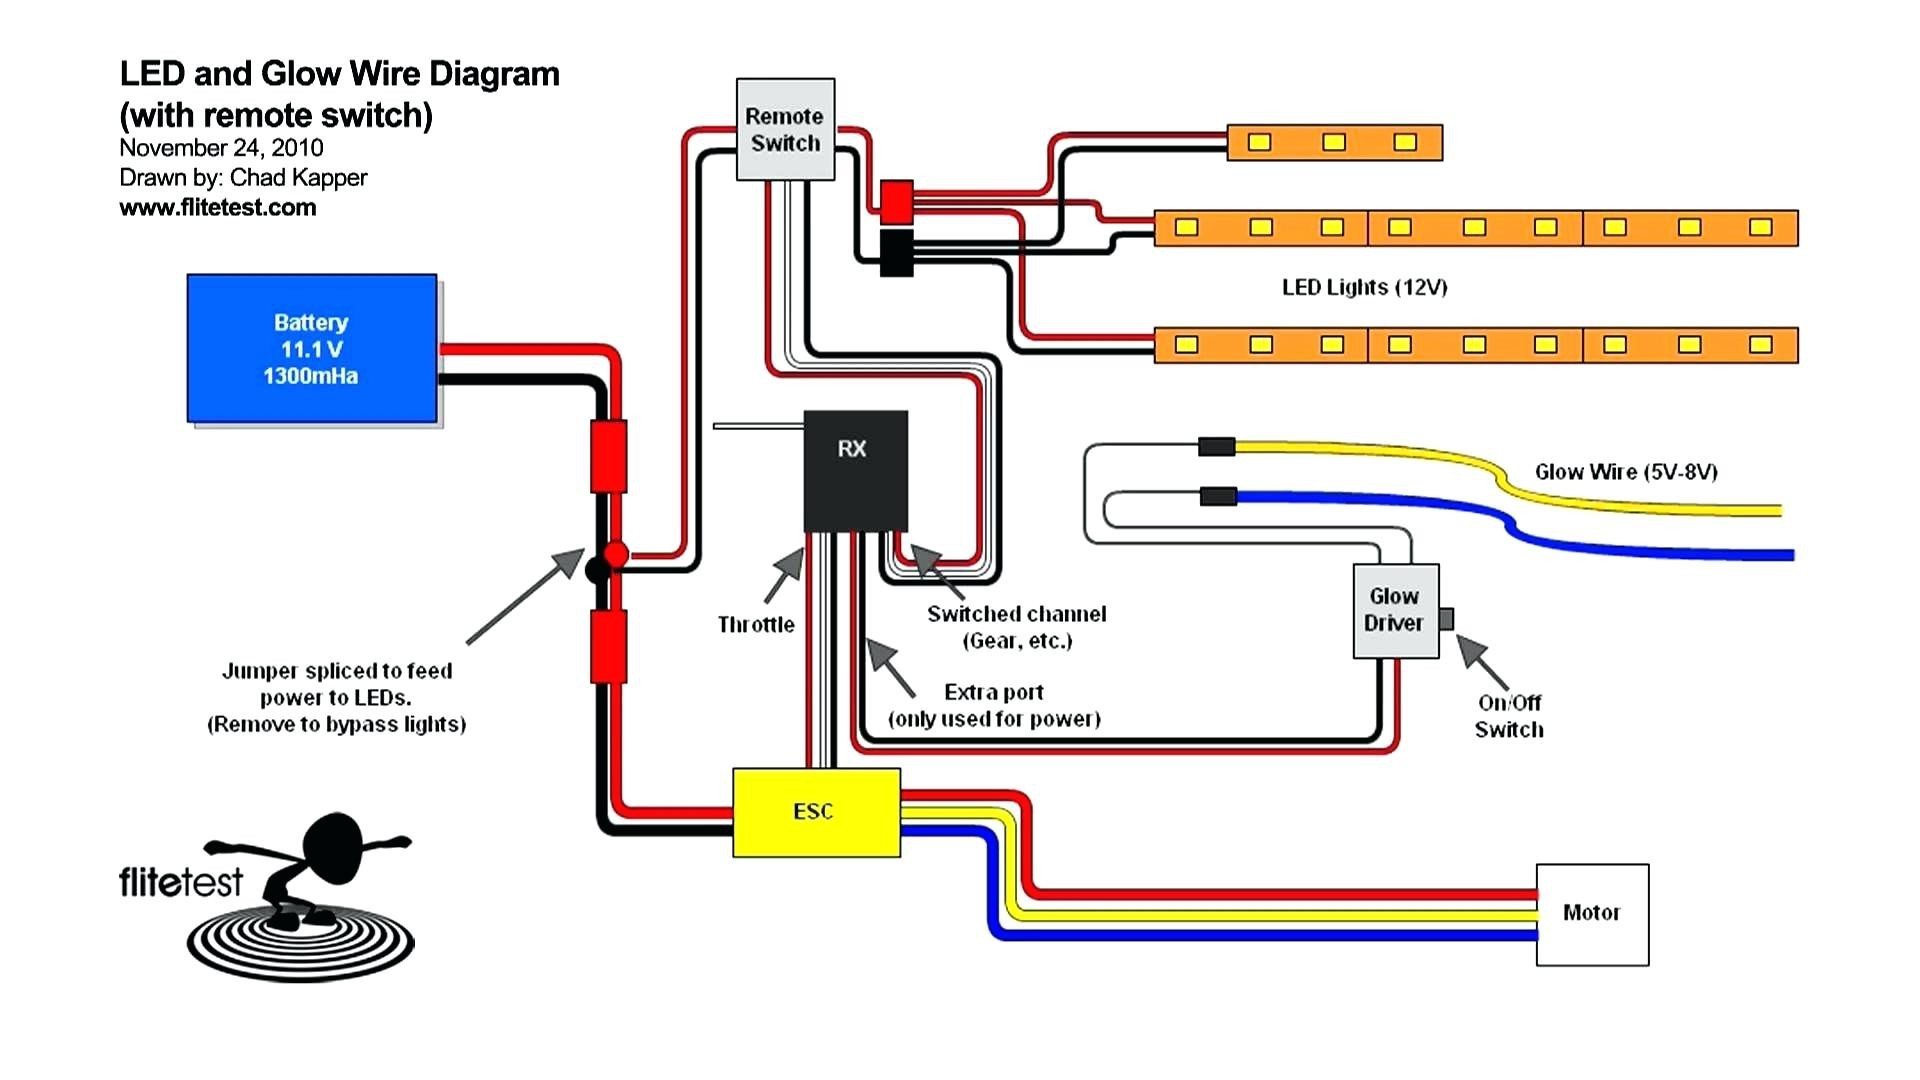 Wiring Diagram for Remote Light Switch Best Wiring Power to Light then Switch Unique 12 Volt